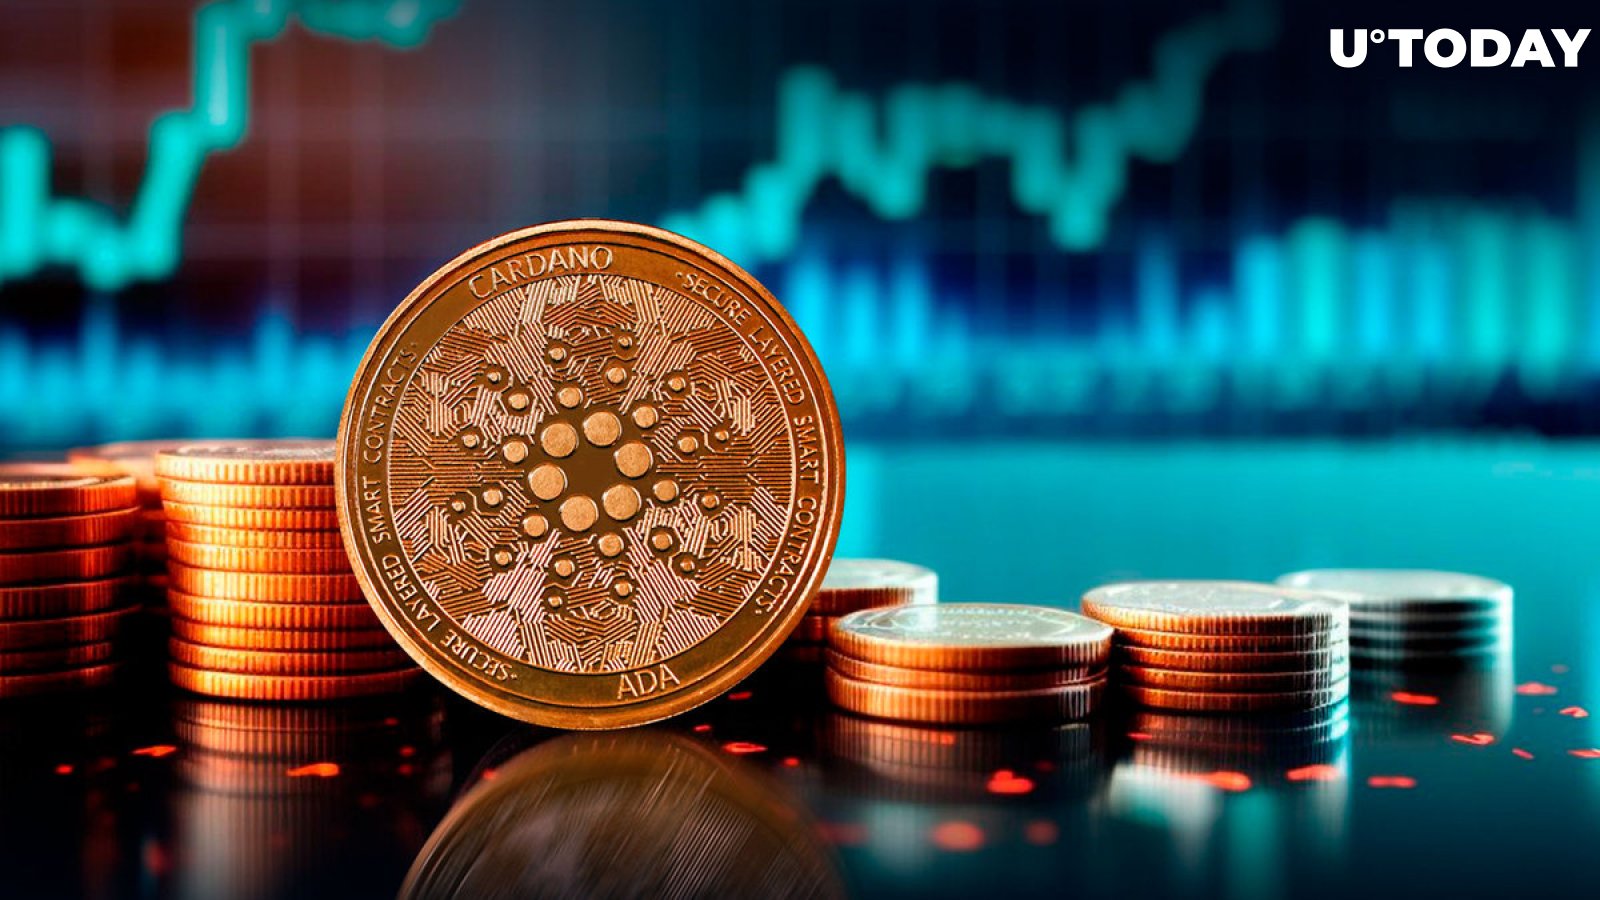 Cardano (ADA) Surges by 678% in Buy Orders